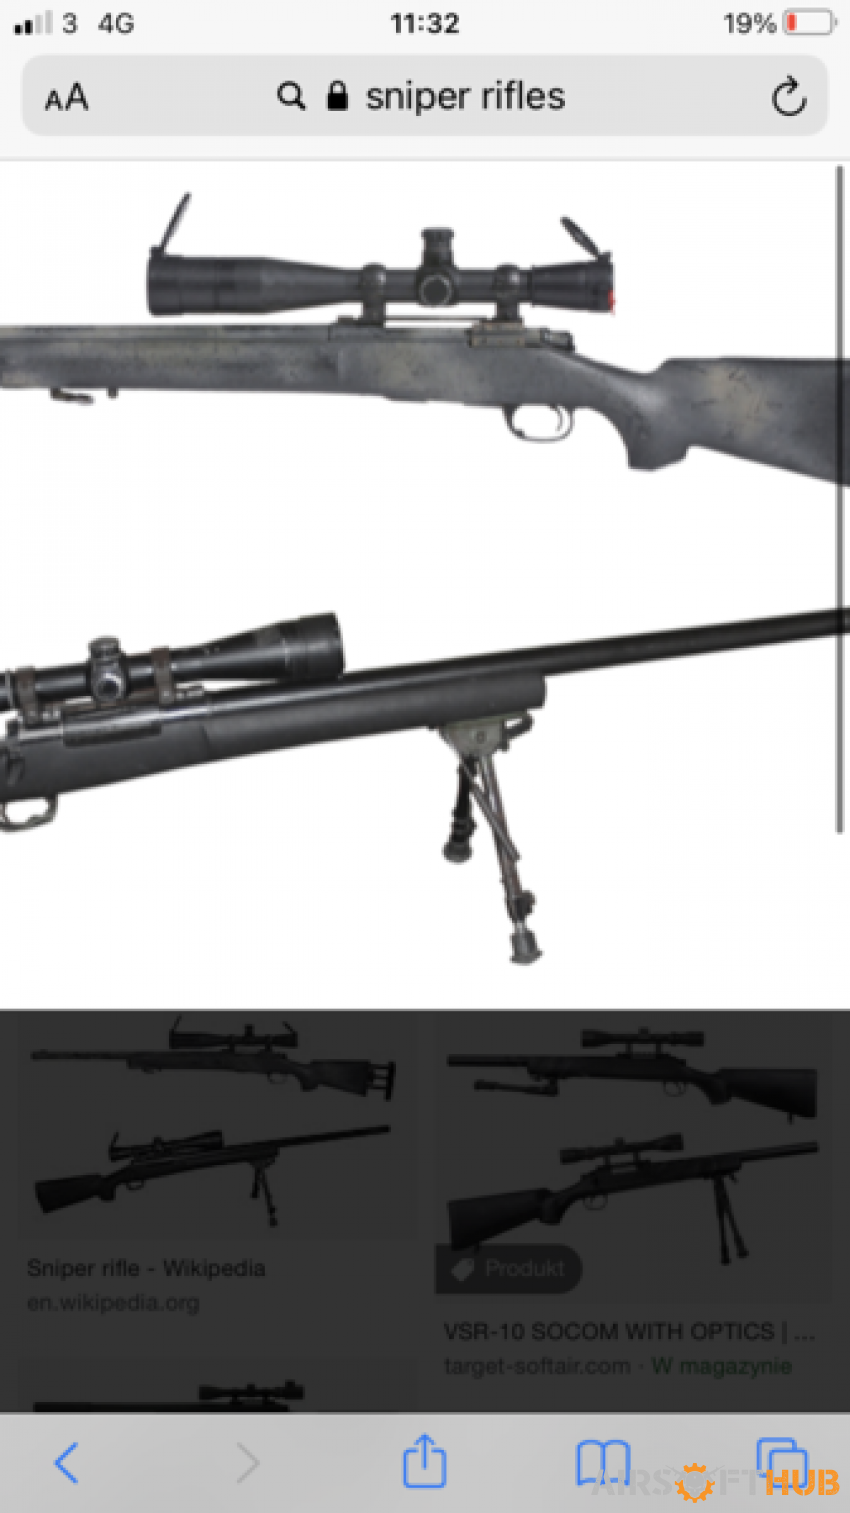 Sniper rifle with good FPS - Used airsoft equipment